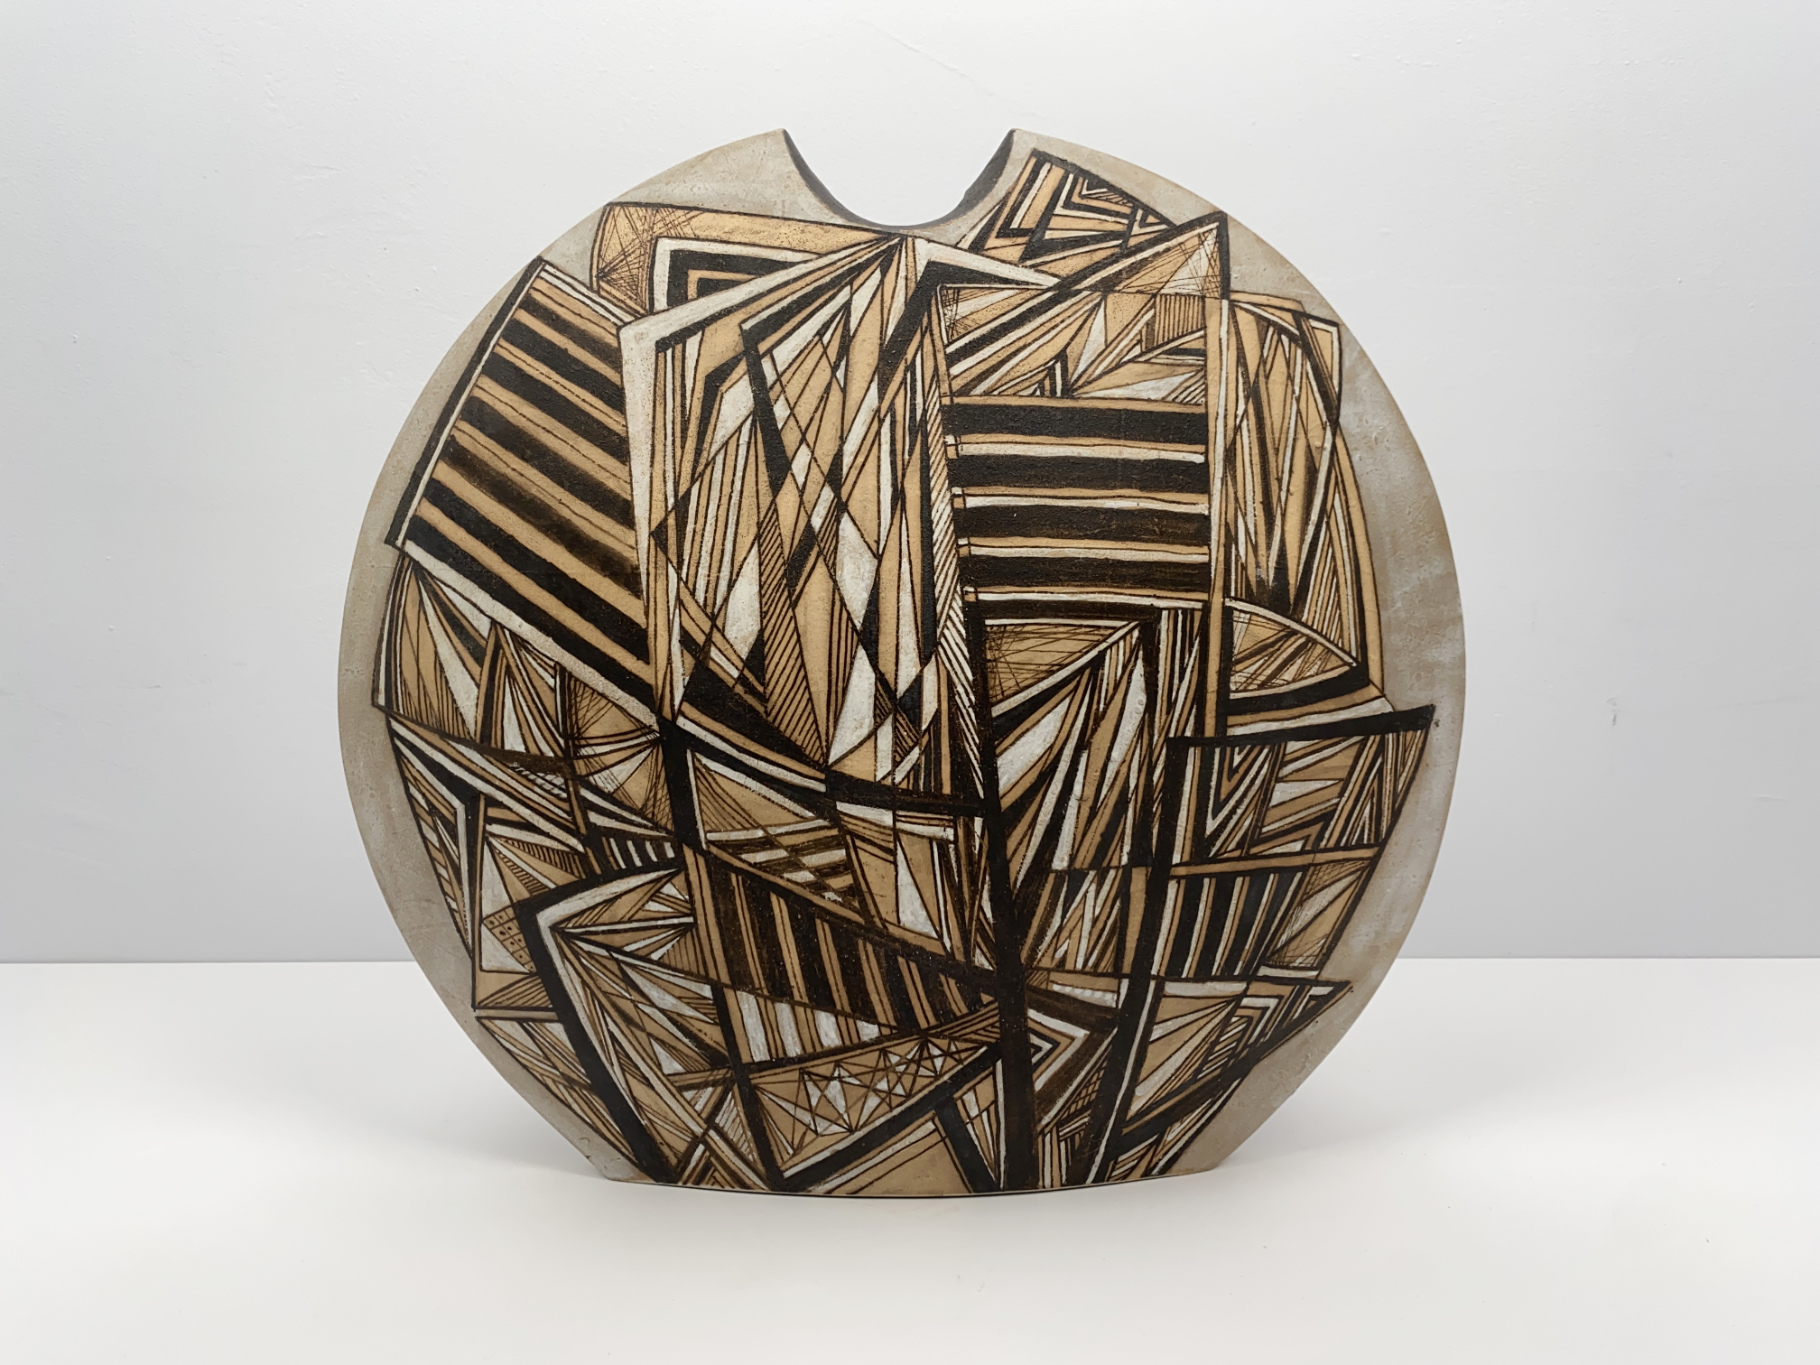 Large Vase, Ceramic, Stoneware, Unique Piece, abstract Composition, Wax Painting on light Iron Engobe and light Engobe, by Wilhelm & Elly Kuch, 1990s